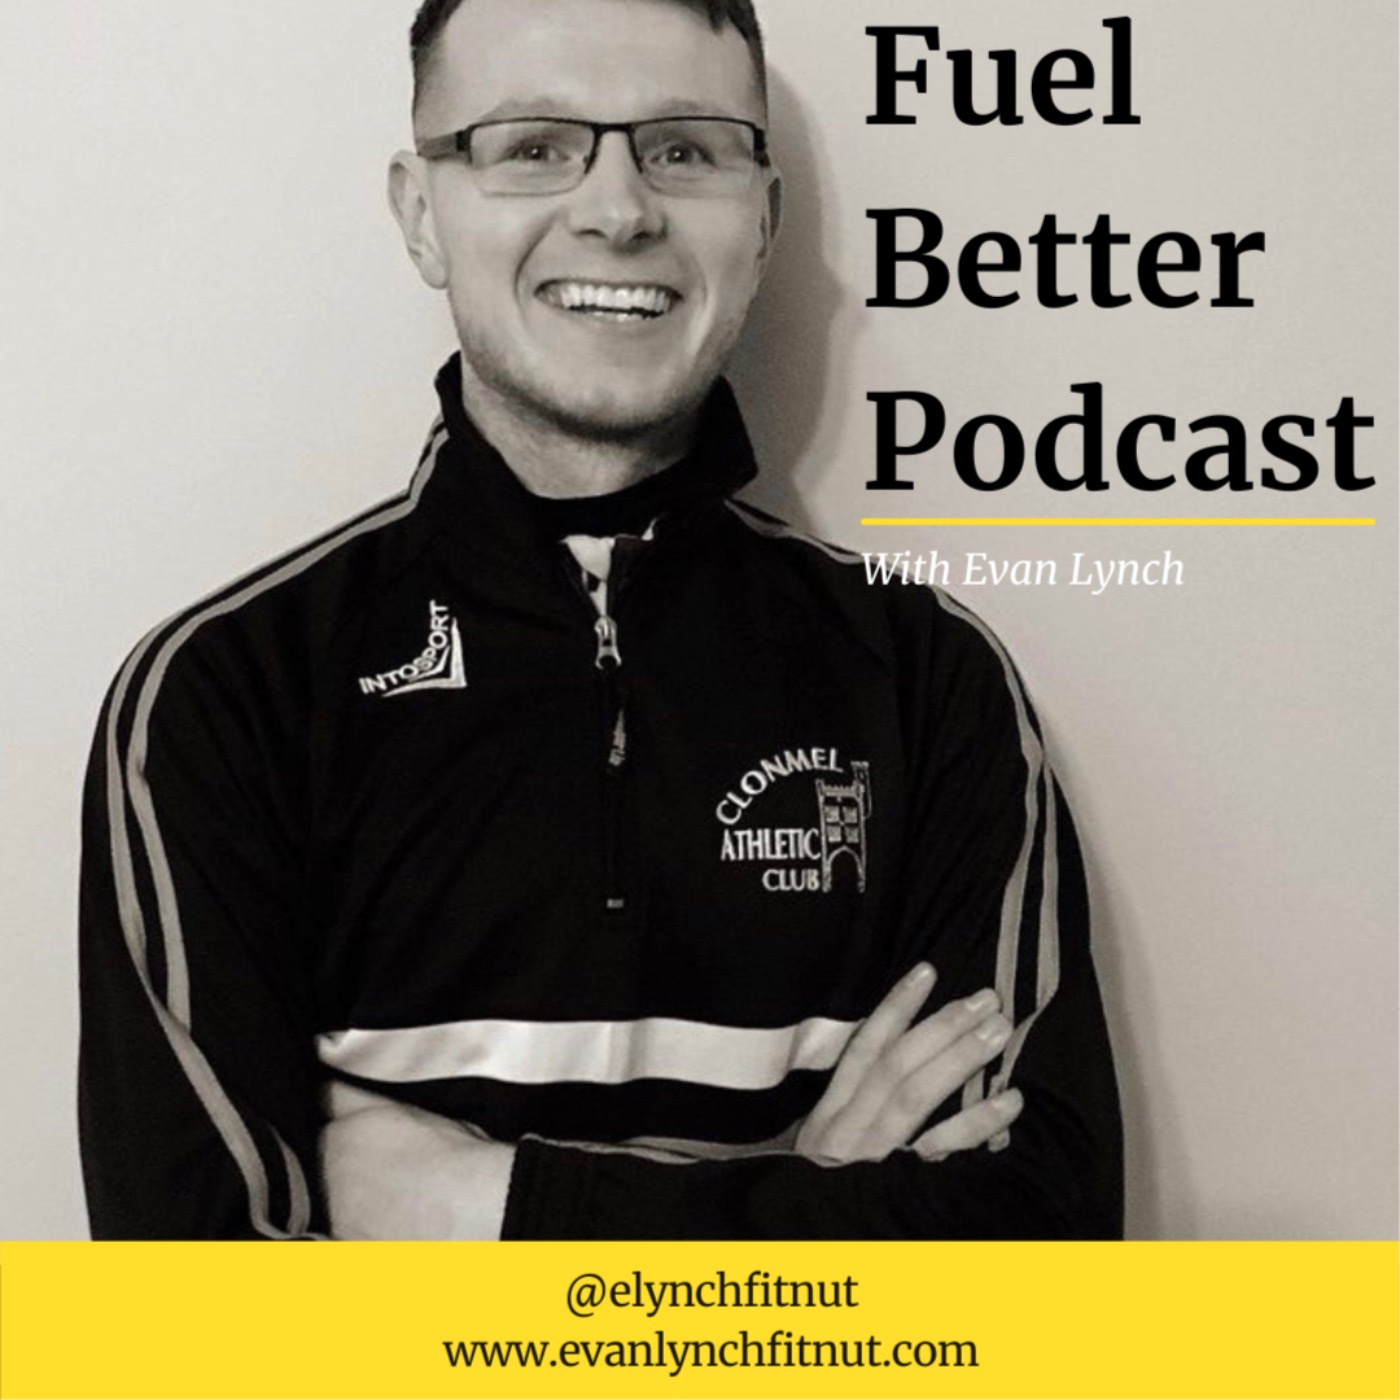 Welcome to the Fuel Better Podcast!